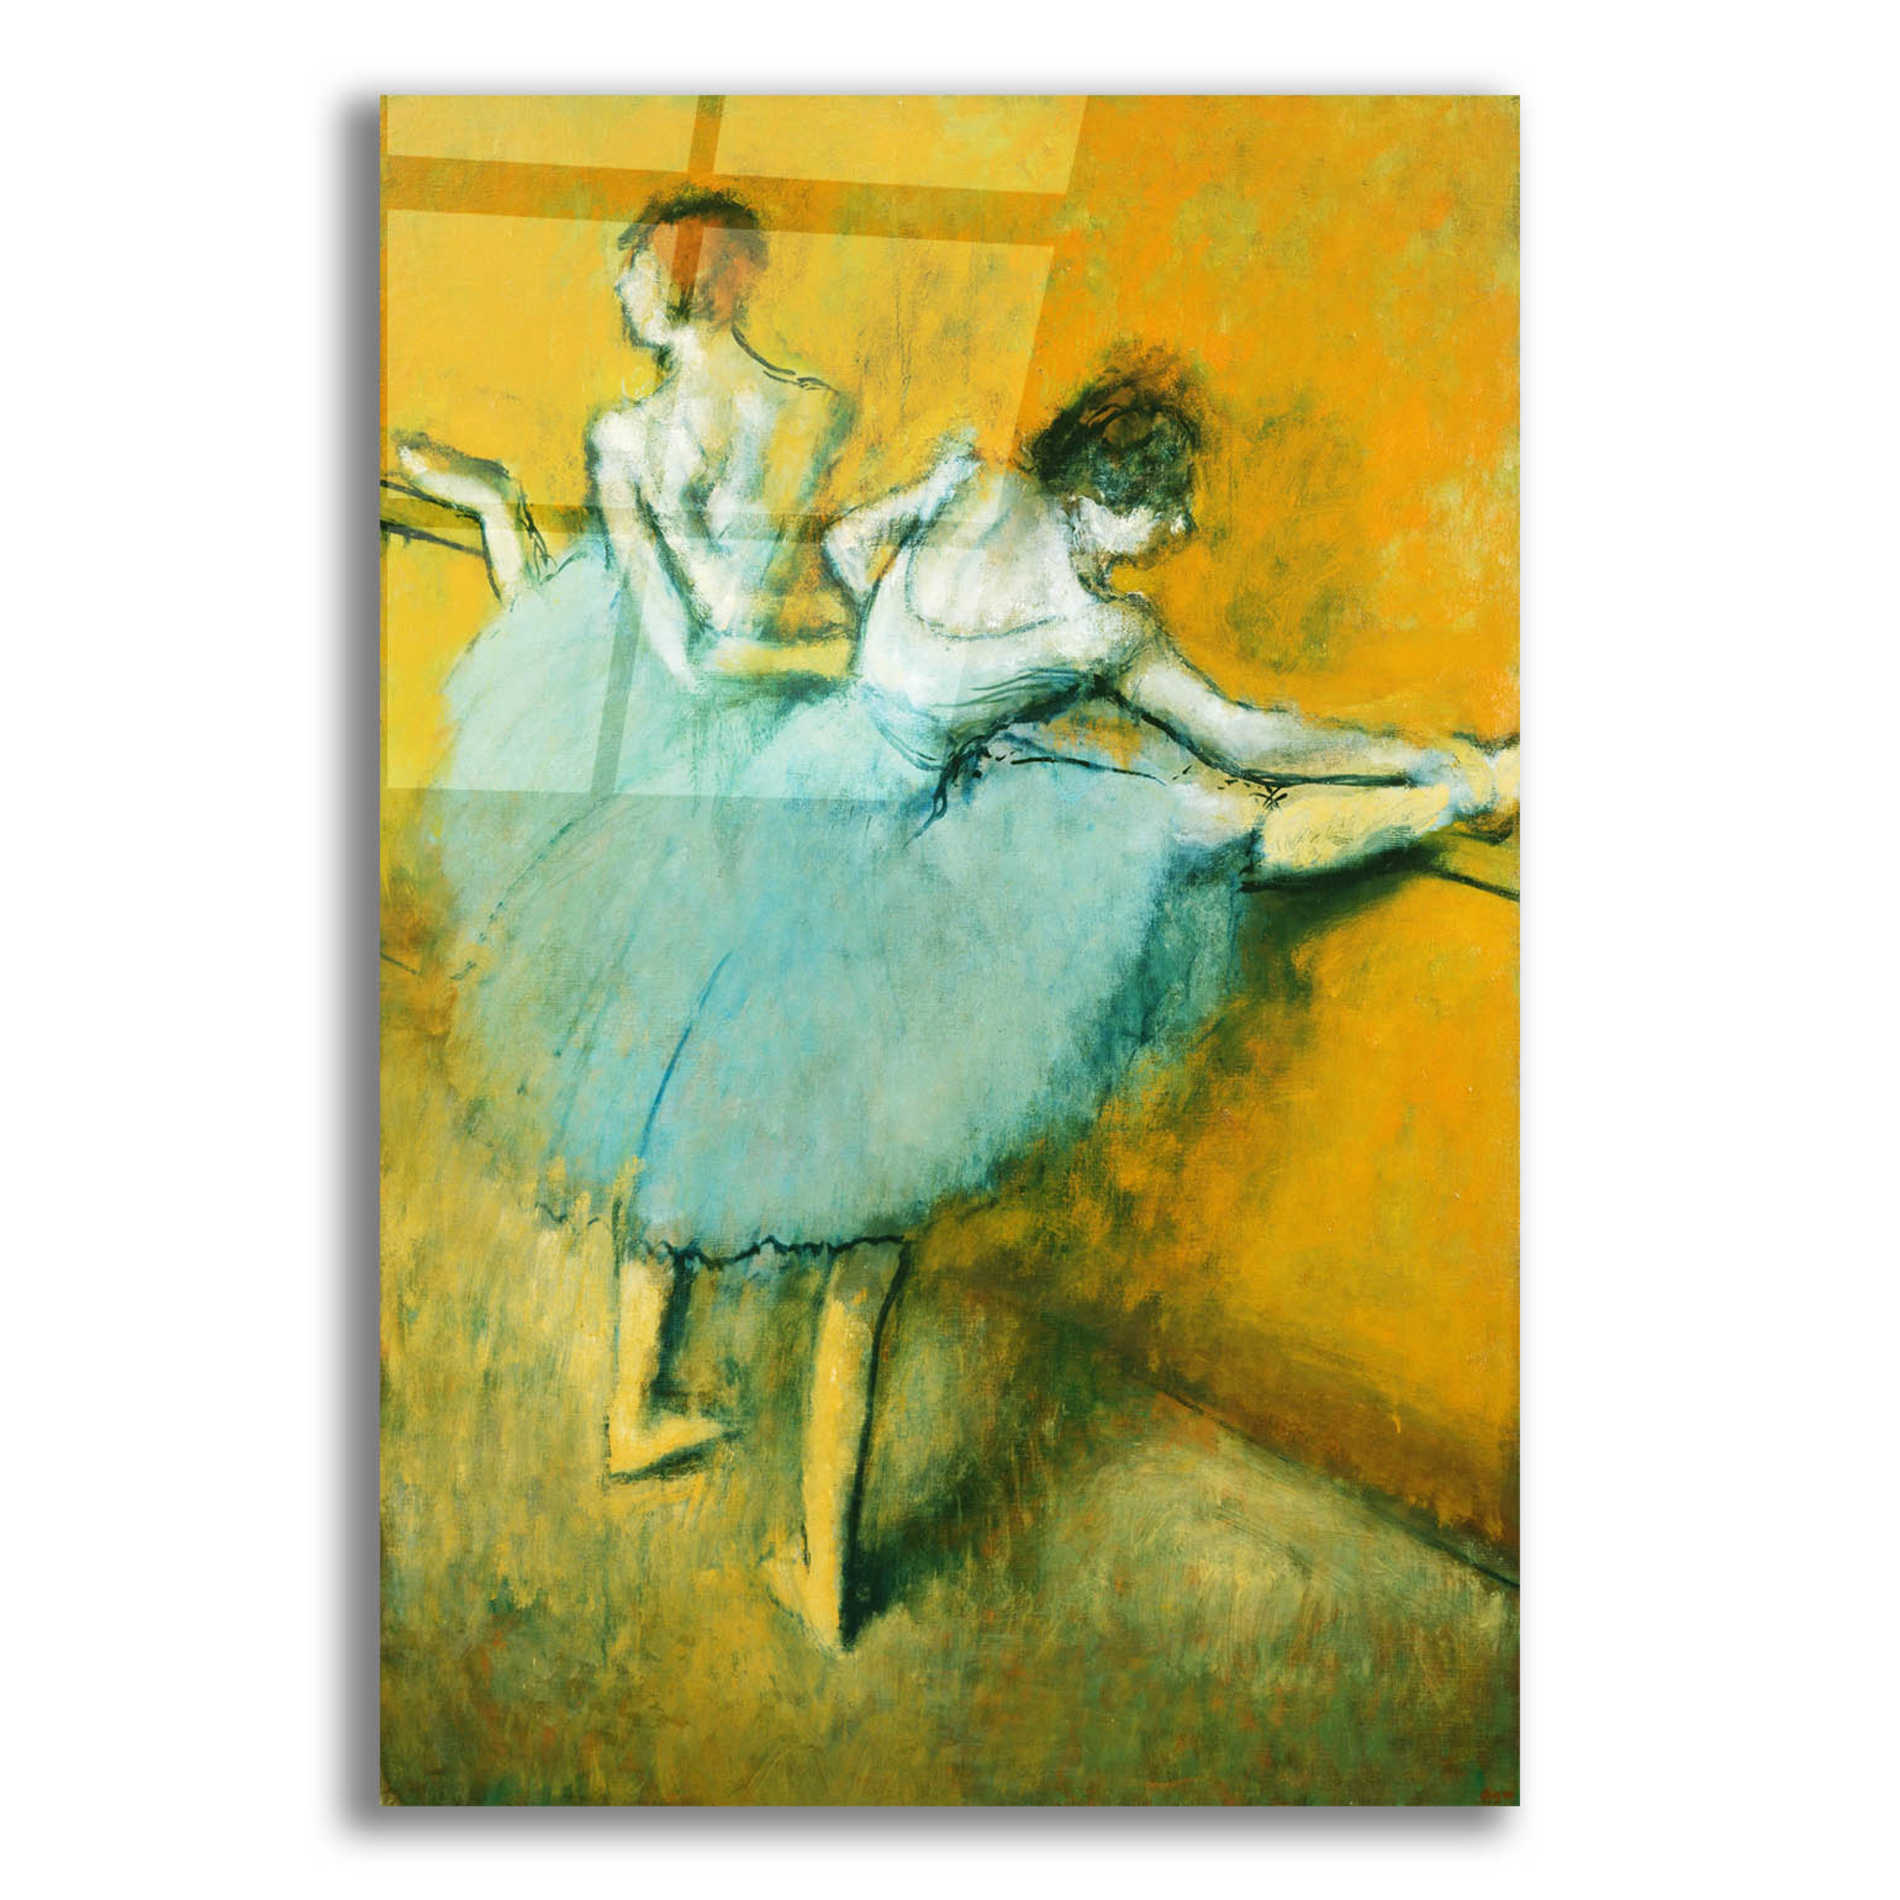 Epic Art 'Dancers at the Barre' by Edgar Degas, Acrylic Glass Wall Art,12x16x1.1x0,18x26x1.1x0,26x34x1.74x0,40x54x1.74x0